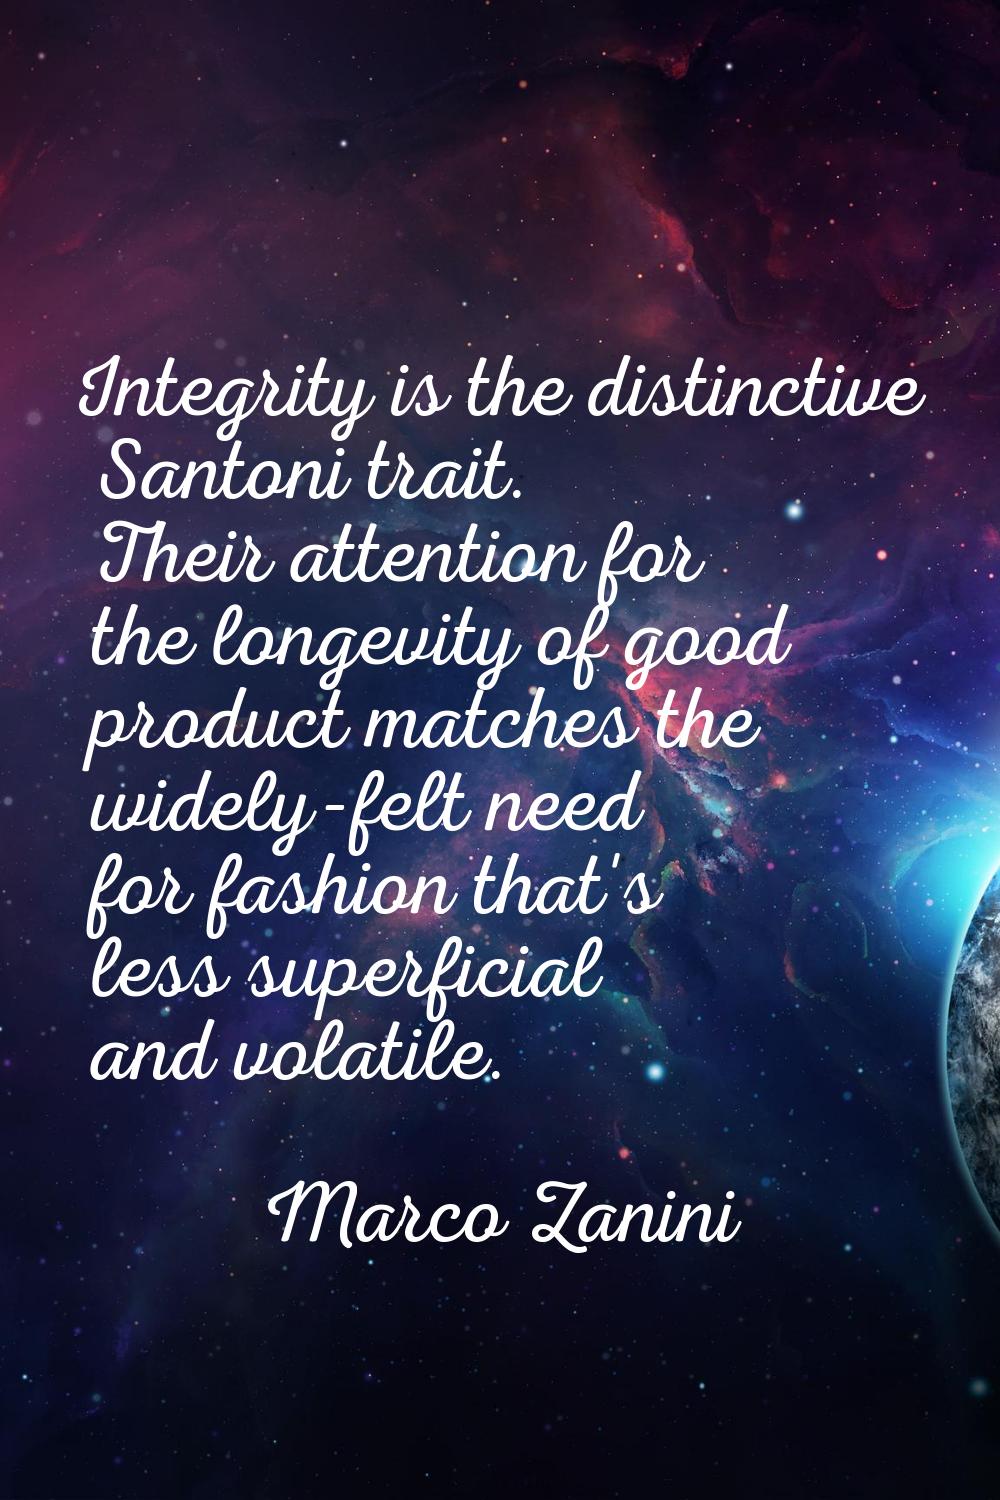 Integrity is the distinctive Santoni trait. Their attention for the longevity of good product match